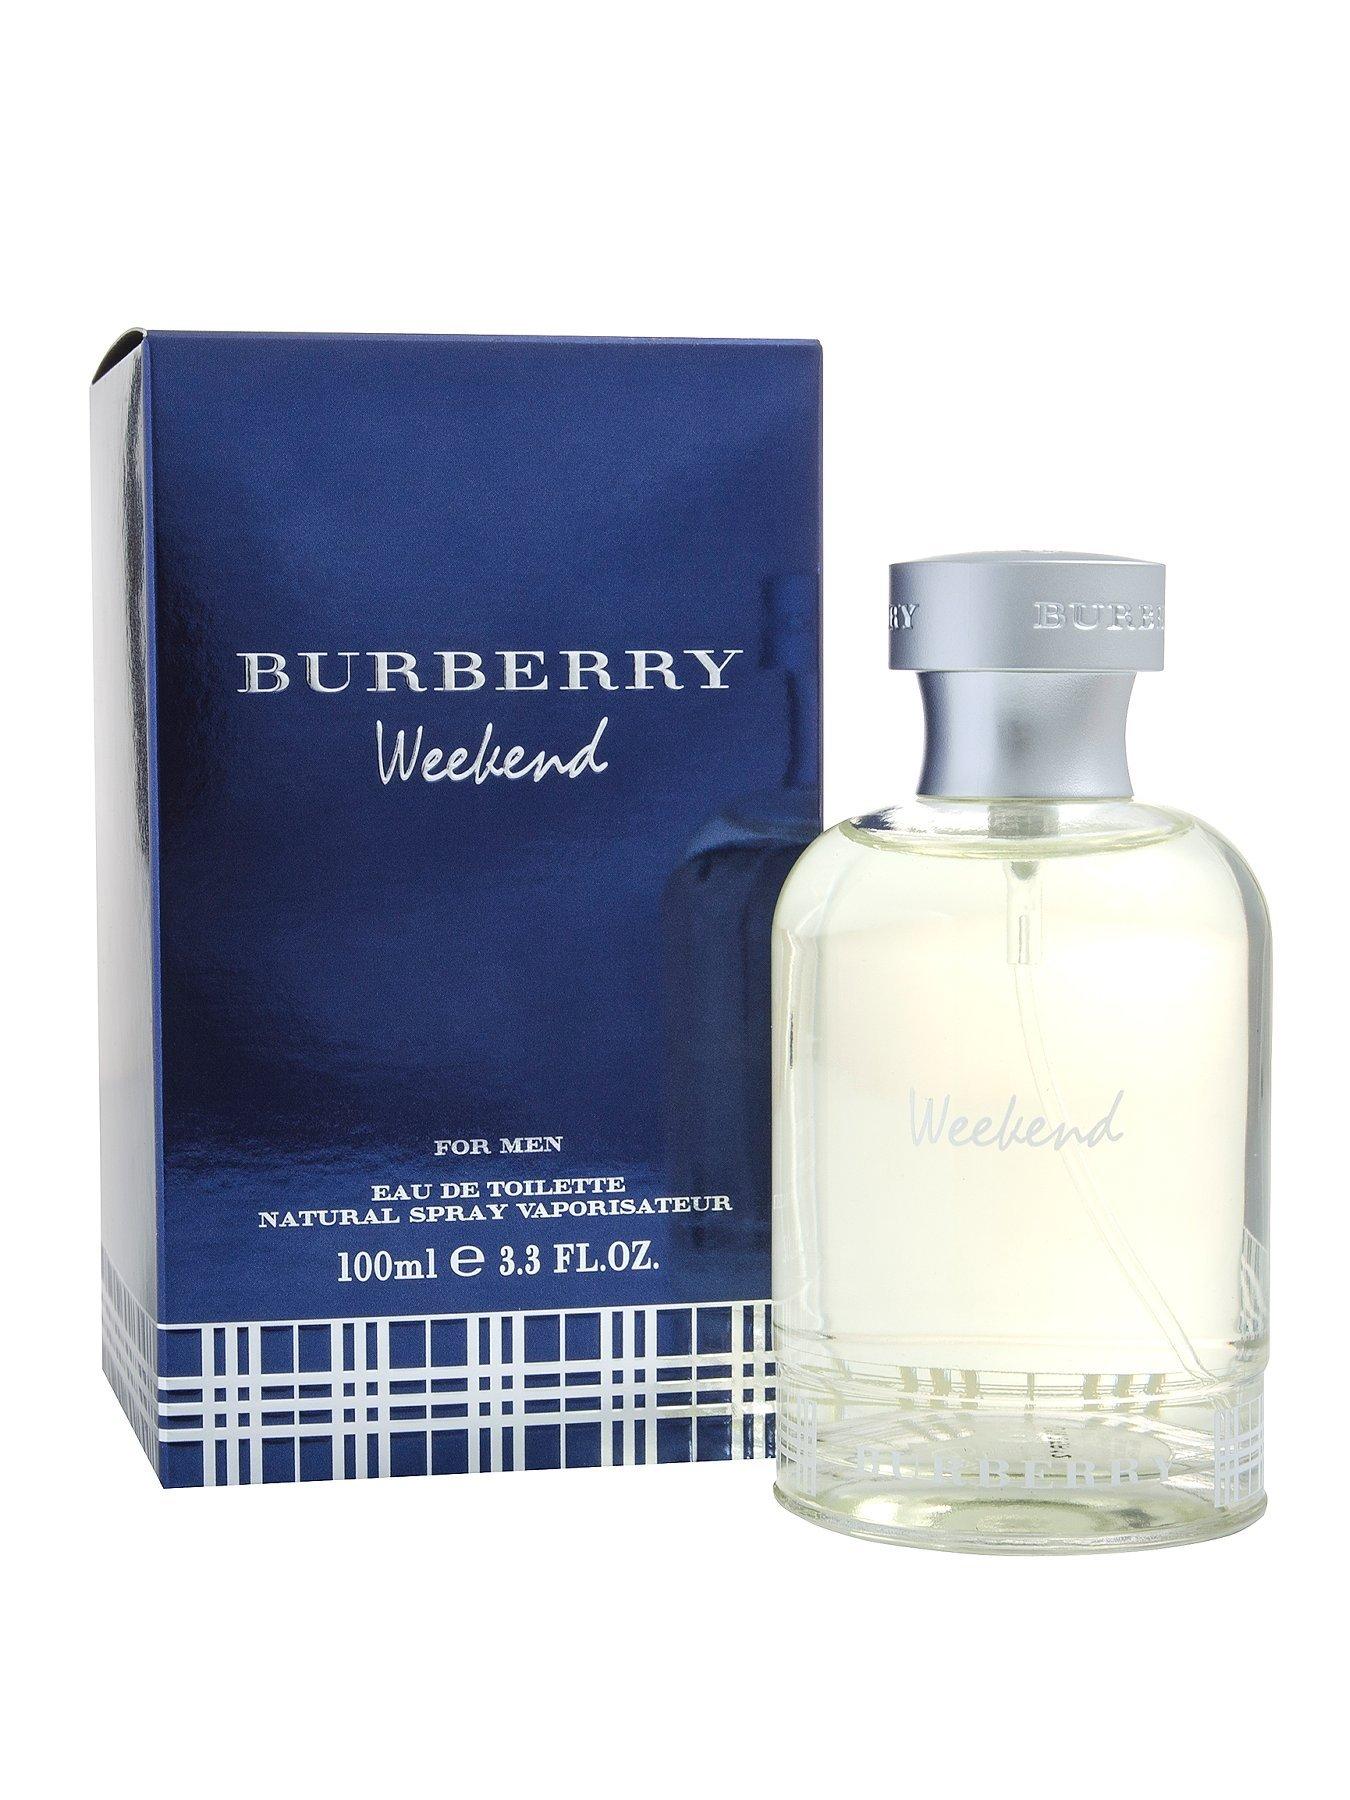 burberry mens aftershave 100ml